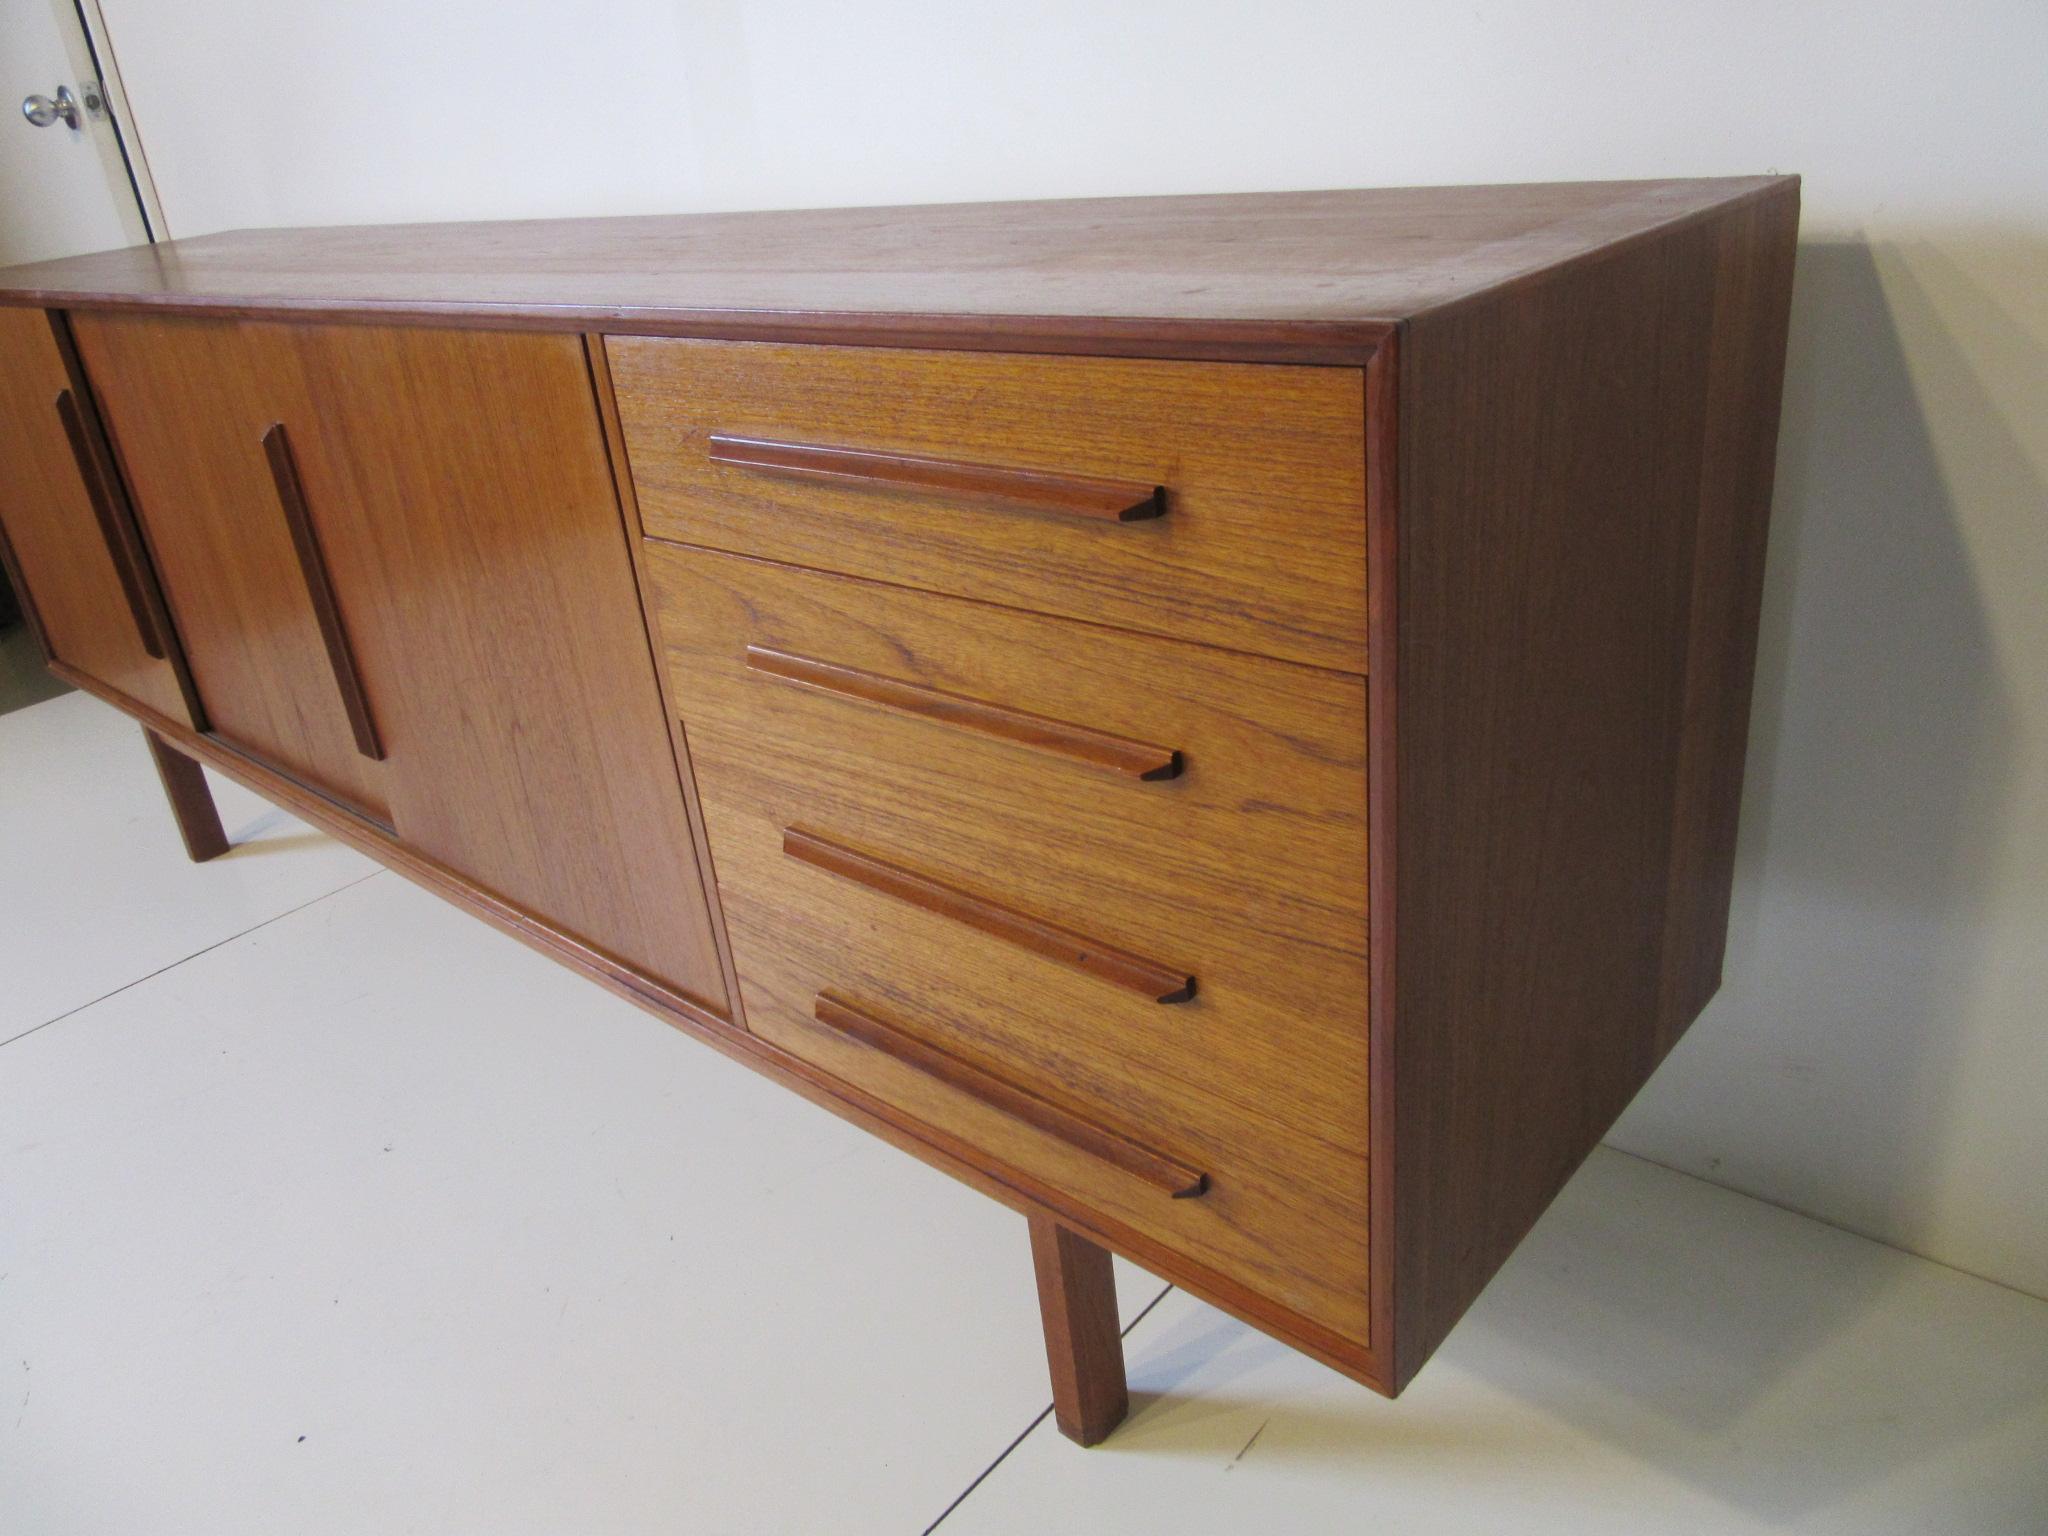 A longer Danish teak wood credenza or server with four drawers, three sliding doors which one contains two small drawers and the other two areas have nonadjustable shelves. Very well crafted with ample storage designed in the manner of IB